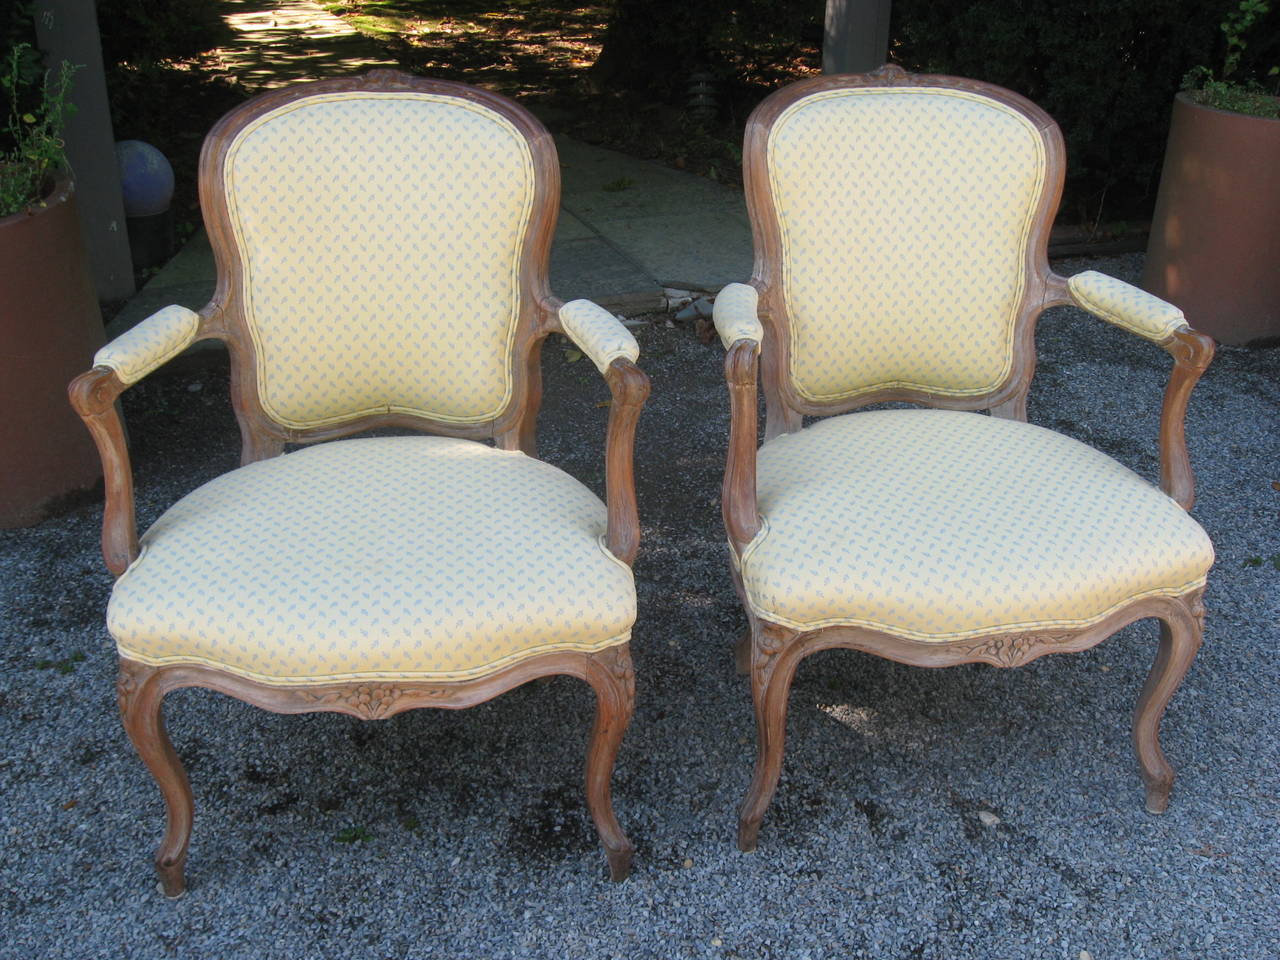 Pair of Louis XV style armchairs in natural wood and custom cotton upholstery with two additional matching pillows.